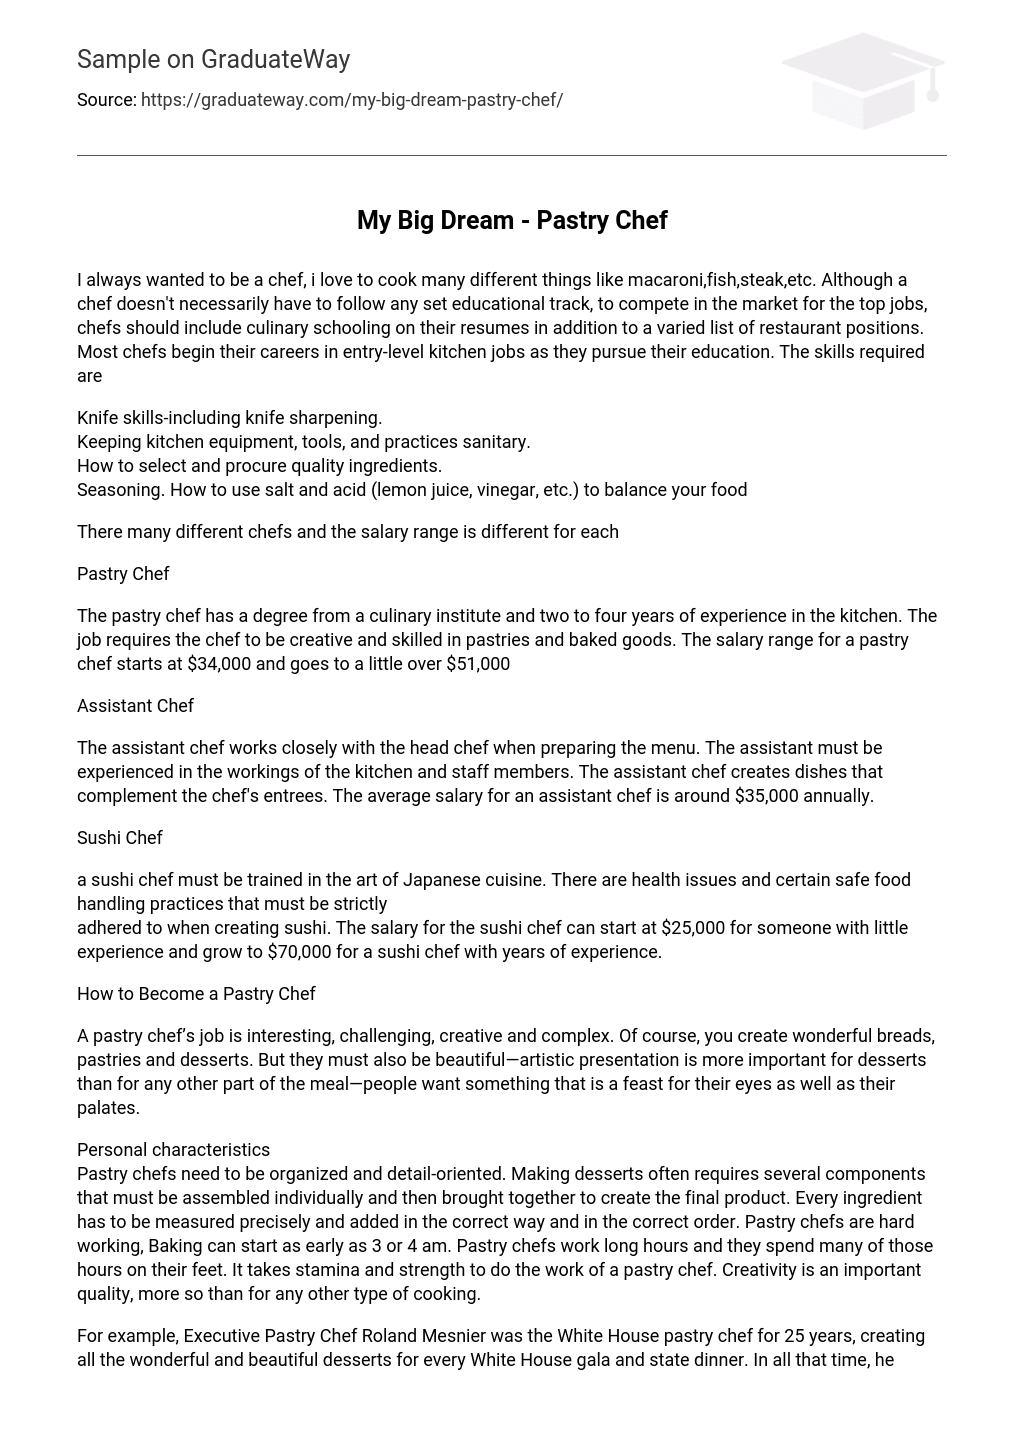 essay about dream chef